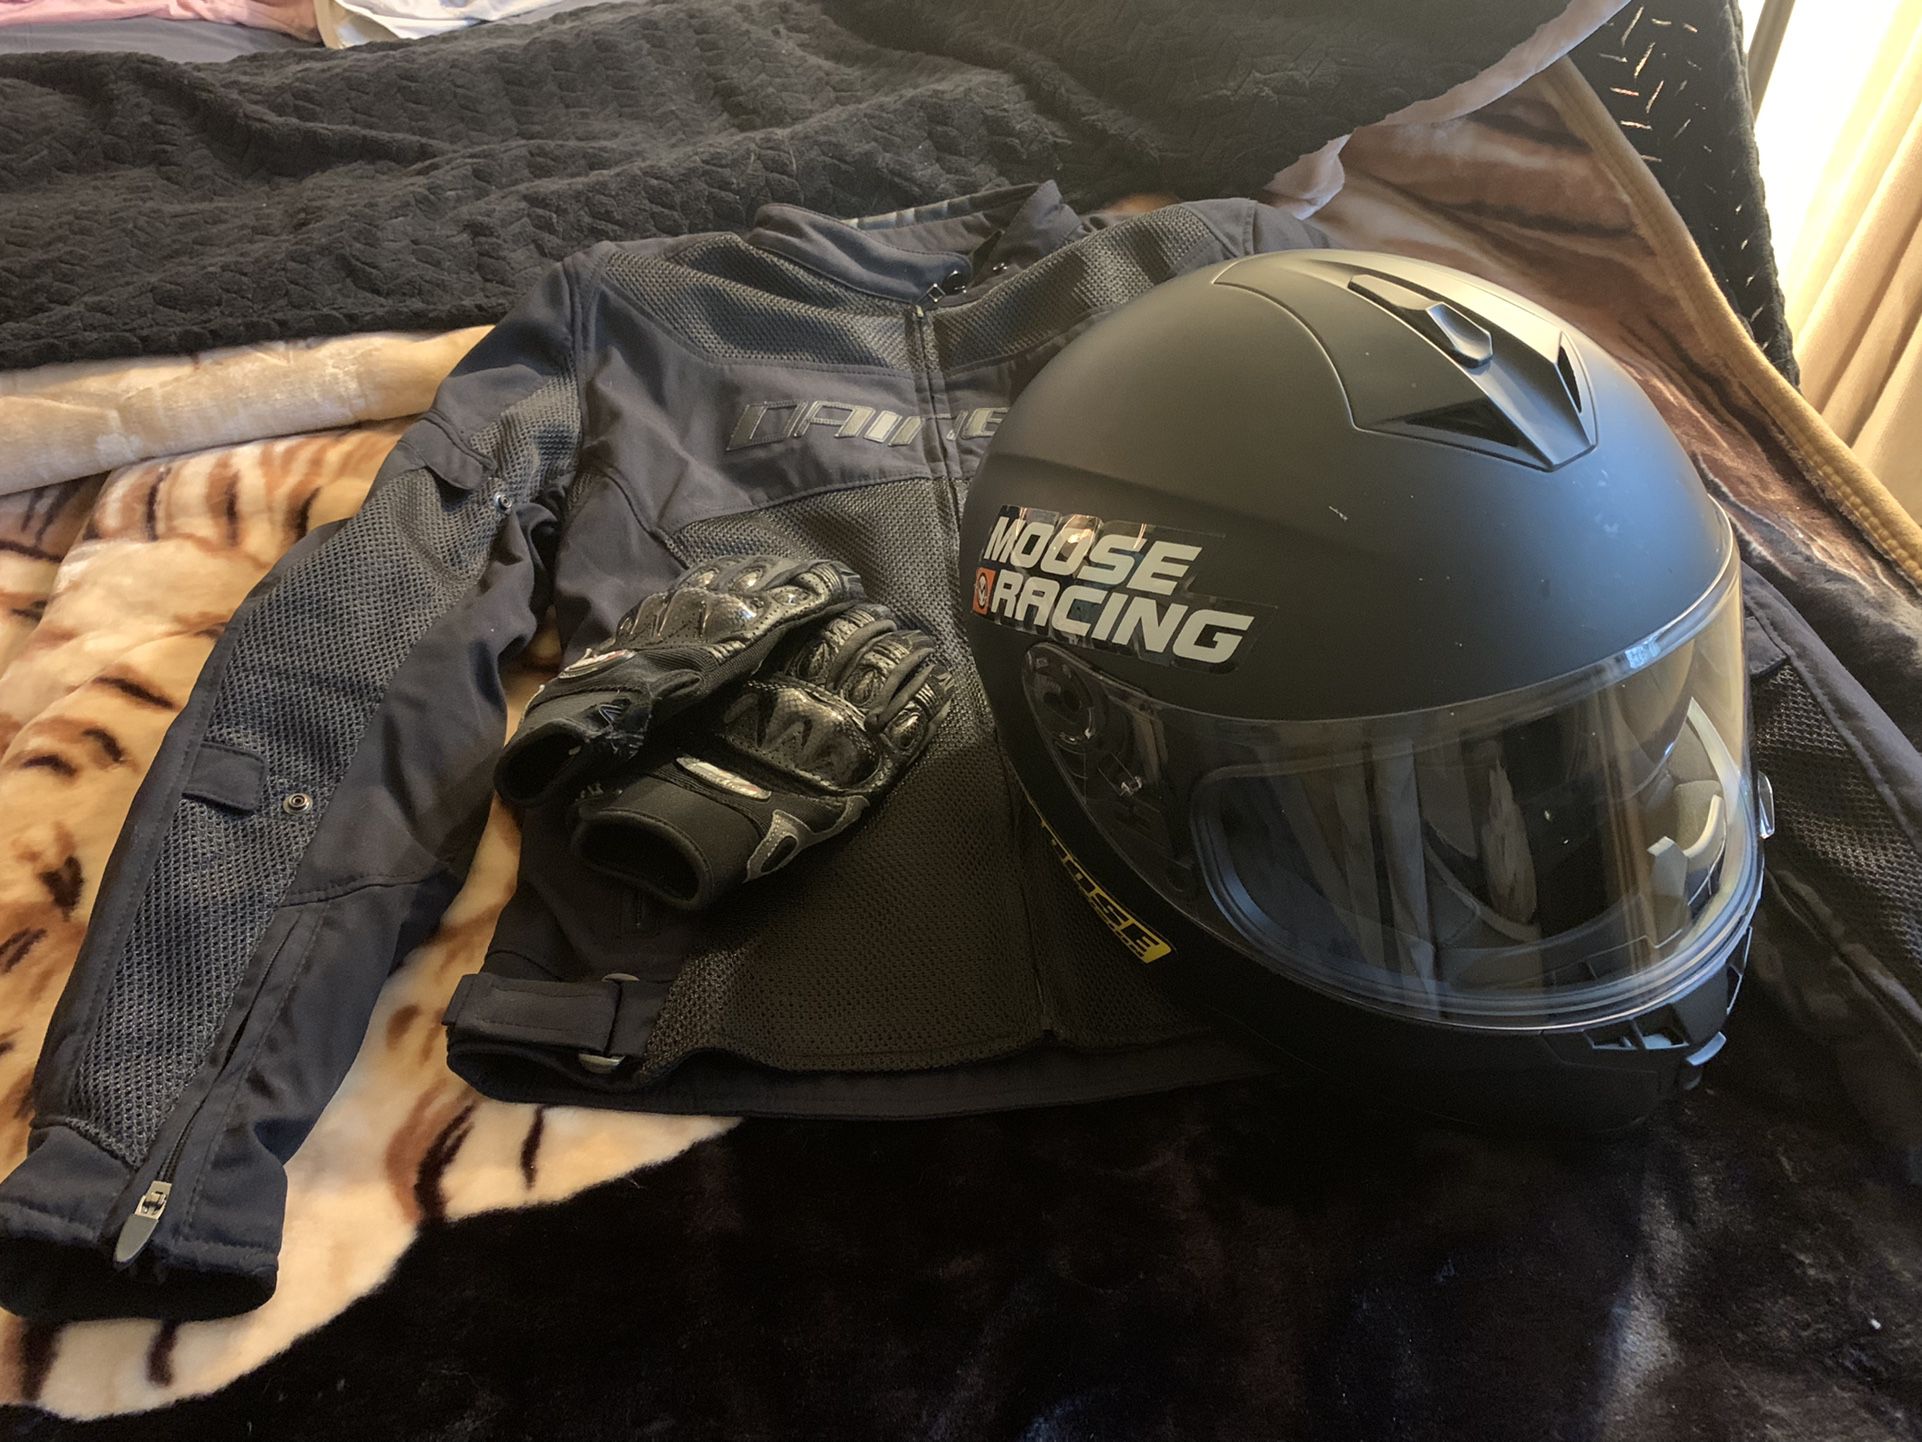 Motorcycle Helmet, Jacket, and gloves for sale.